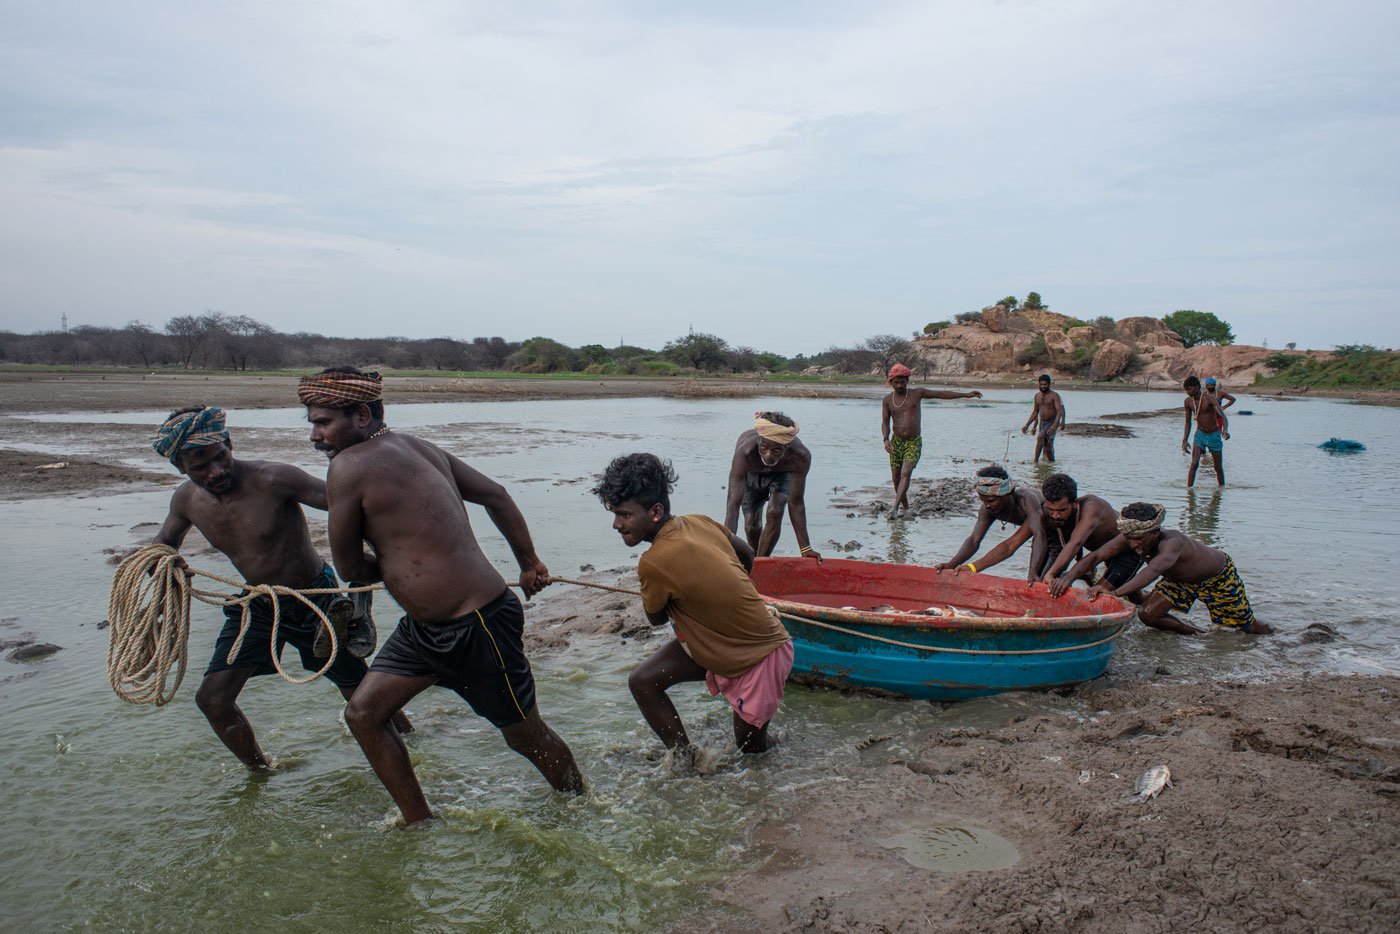 Fishermen pushing their coracle towards the shore; it is heavy and loaded with their catch